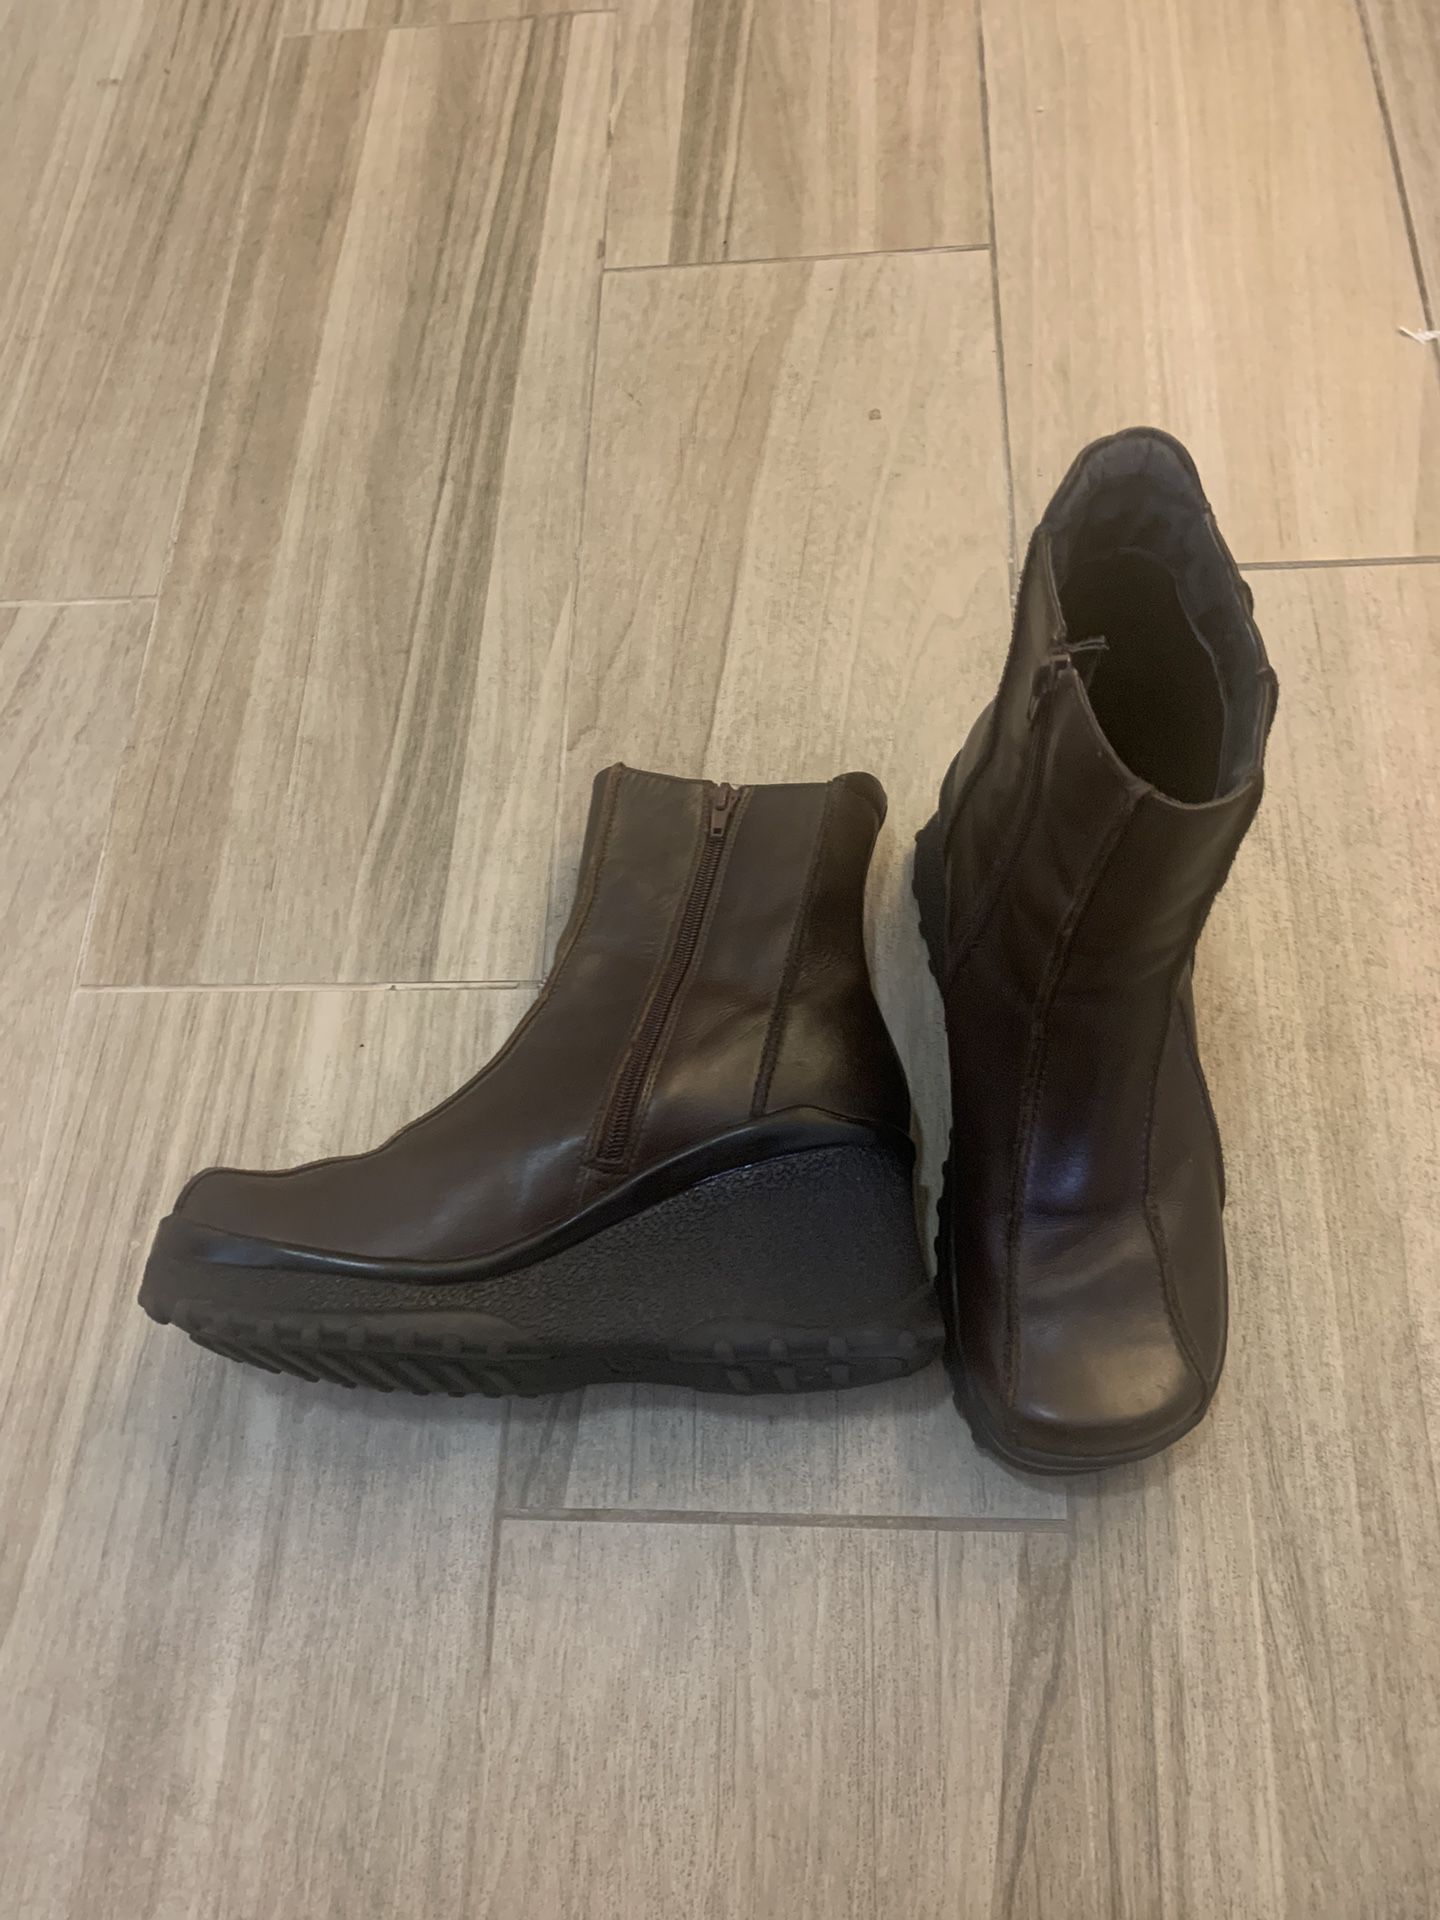 🔥GREAT DEAL🔥 ALDO Female Boots / Shoes